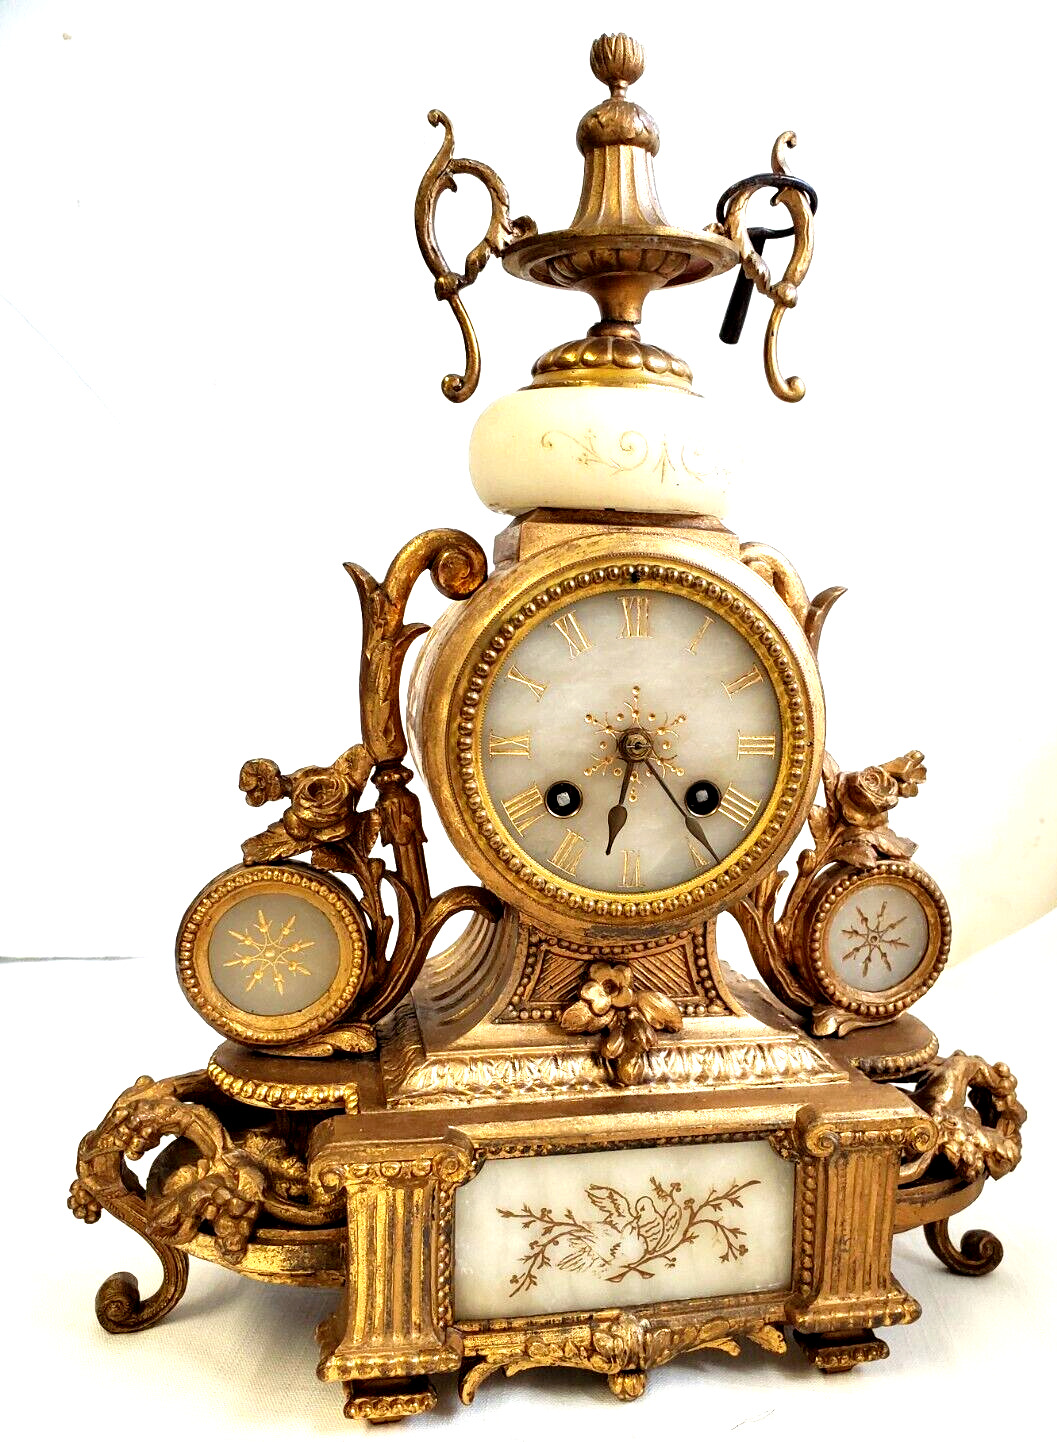 Beautiful 19th C. French Marble & Ormolu Mantel Clock Full working and chiming